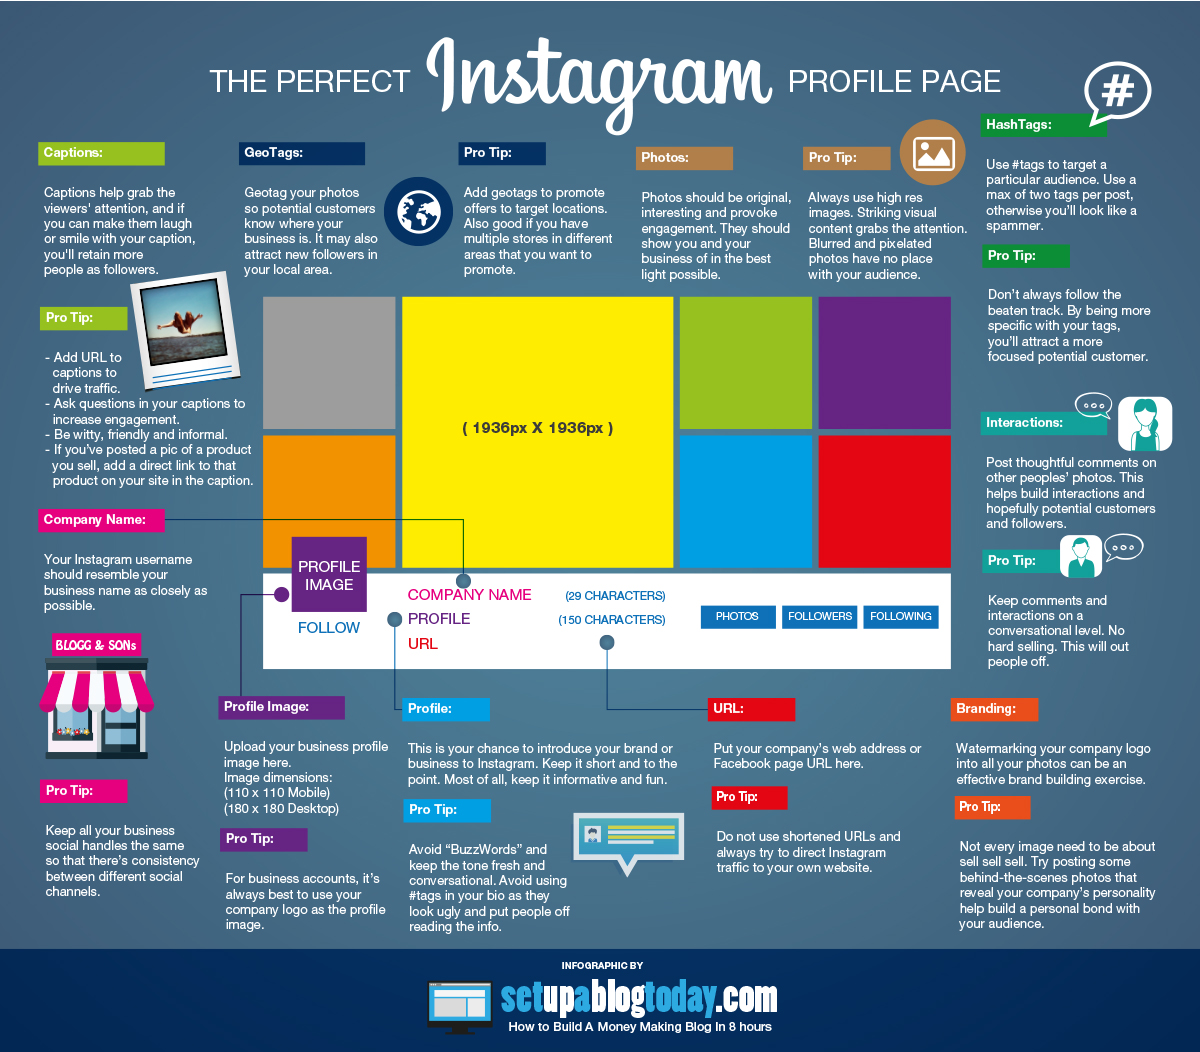 Tips for Your Instagram Posts, Plus a Perfect Profile Page 